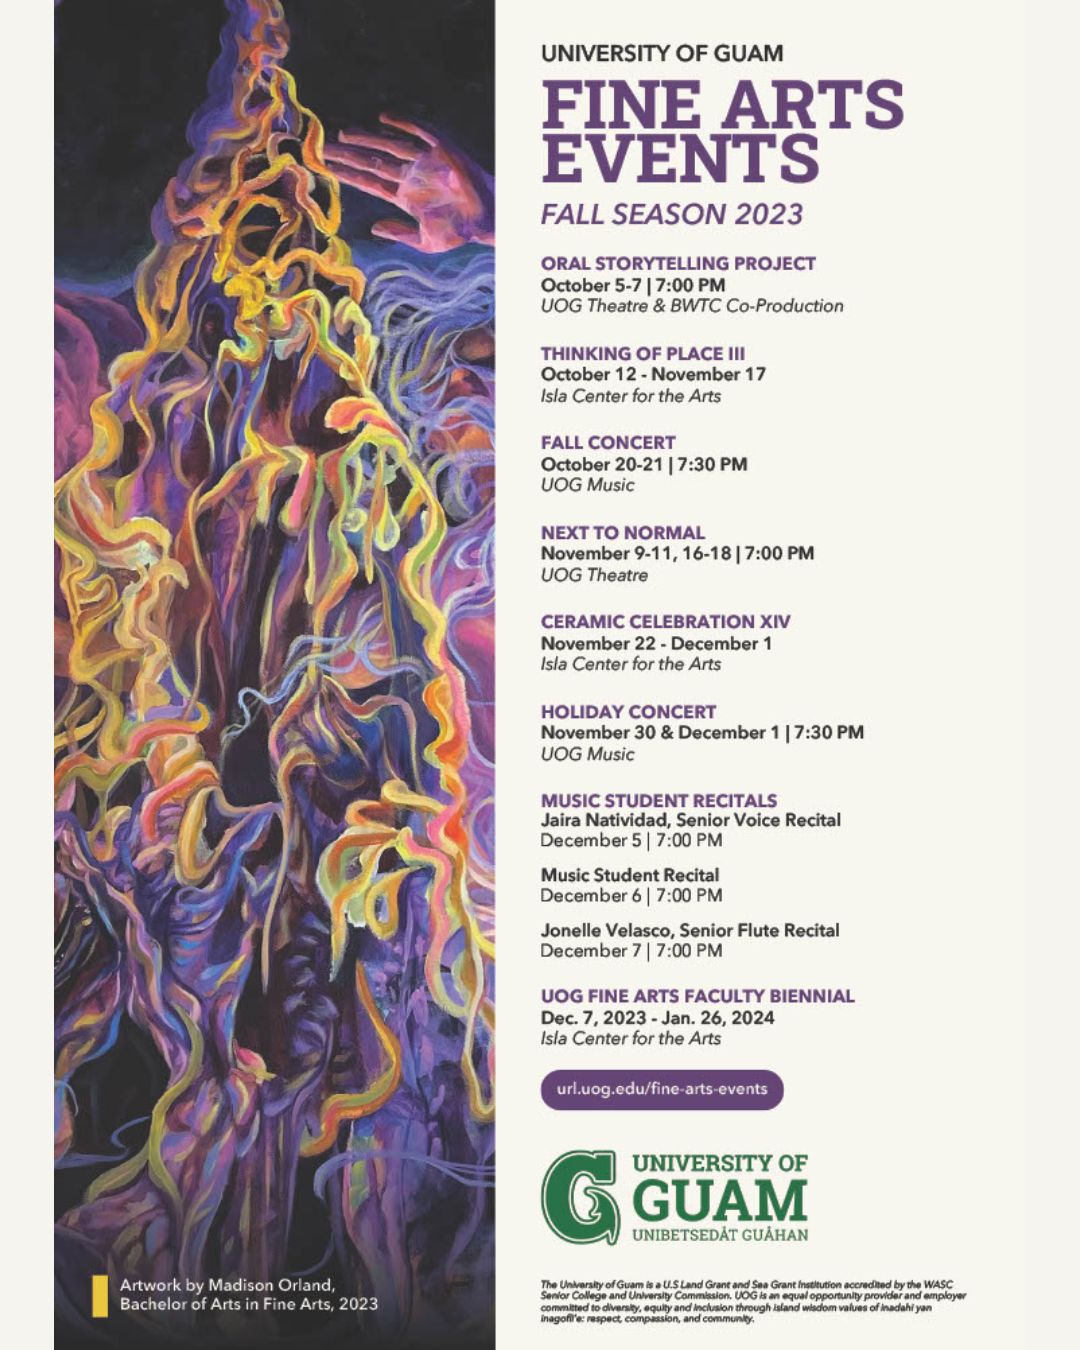 Fine Arts Events: Theater Performances, Musical Concerts, and Gallery. Call 671-735-2700 for dates.